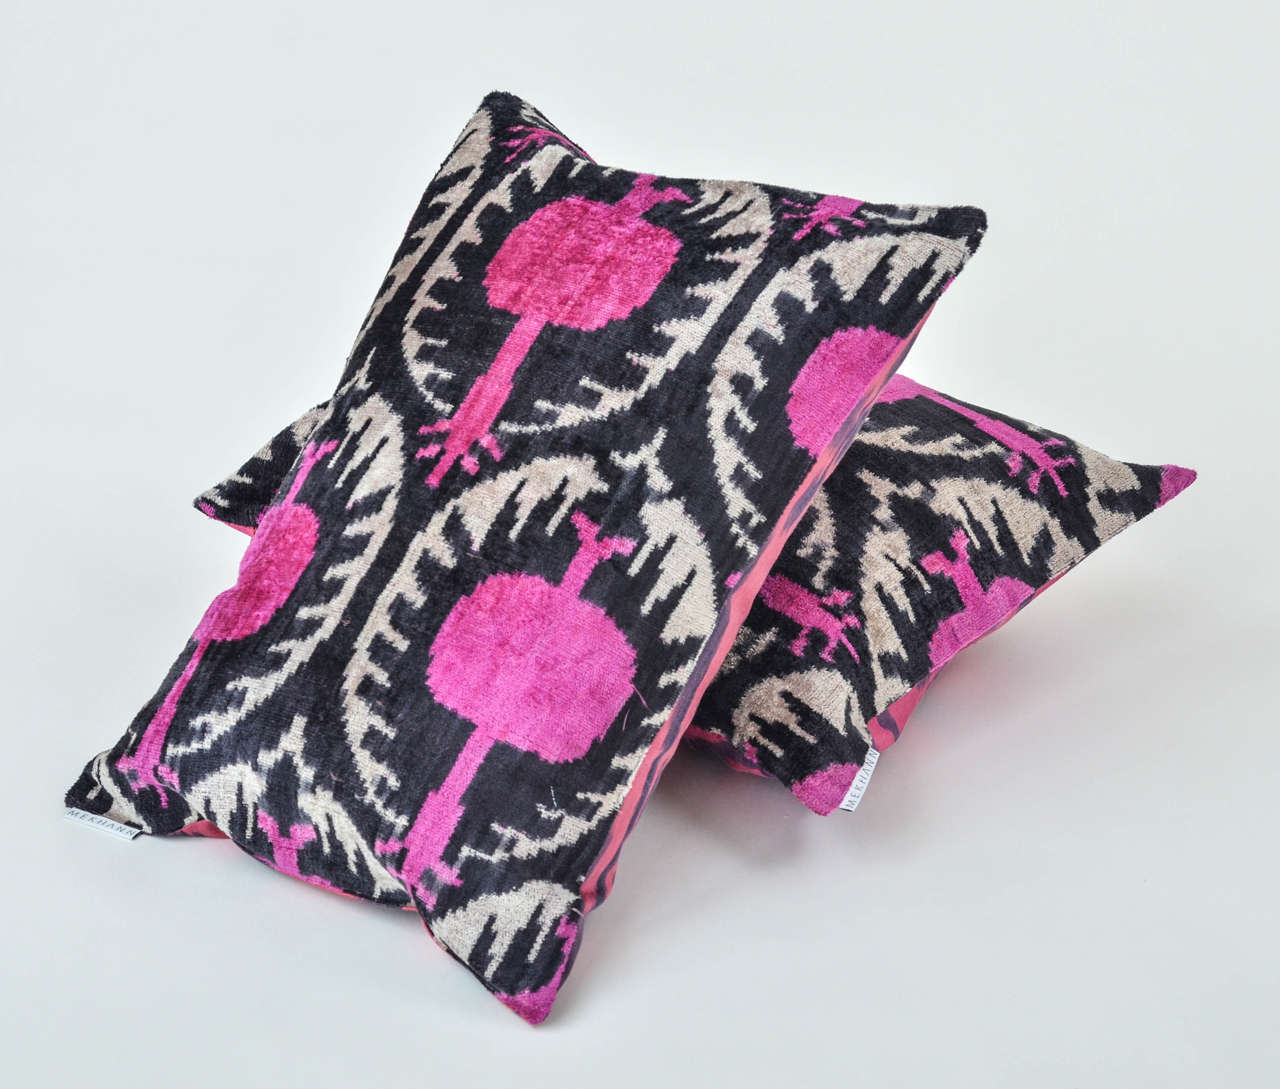 Pair of Turkish silk velvet pillows with printed silk backs and hidden zippers.
Handwoven silk fabric, colors are hot pink, black and cream.
From the Grand Bazaar in Istanbul.
Inserts included.